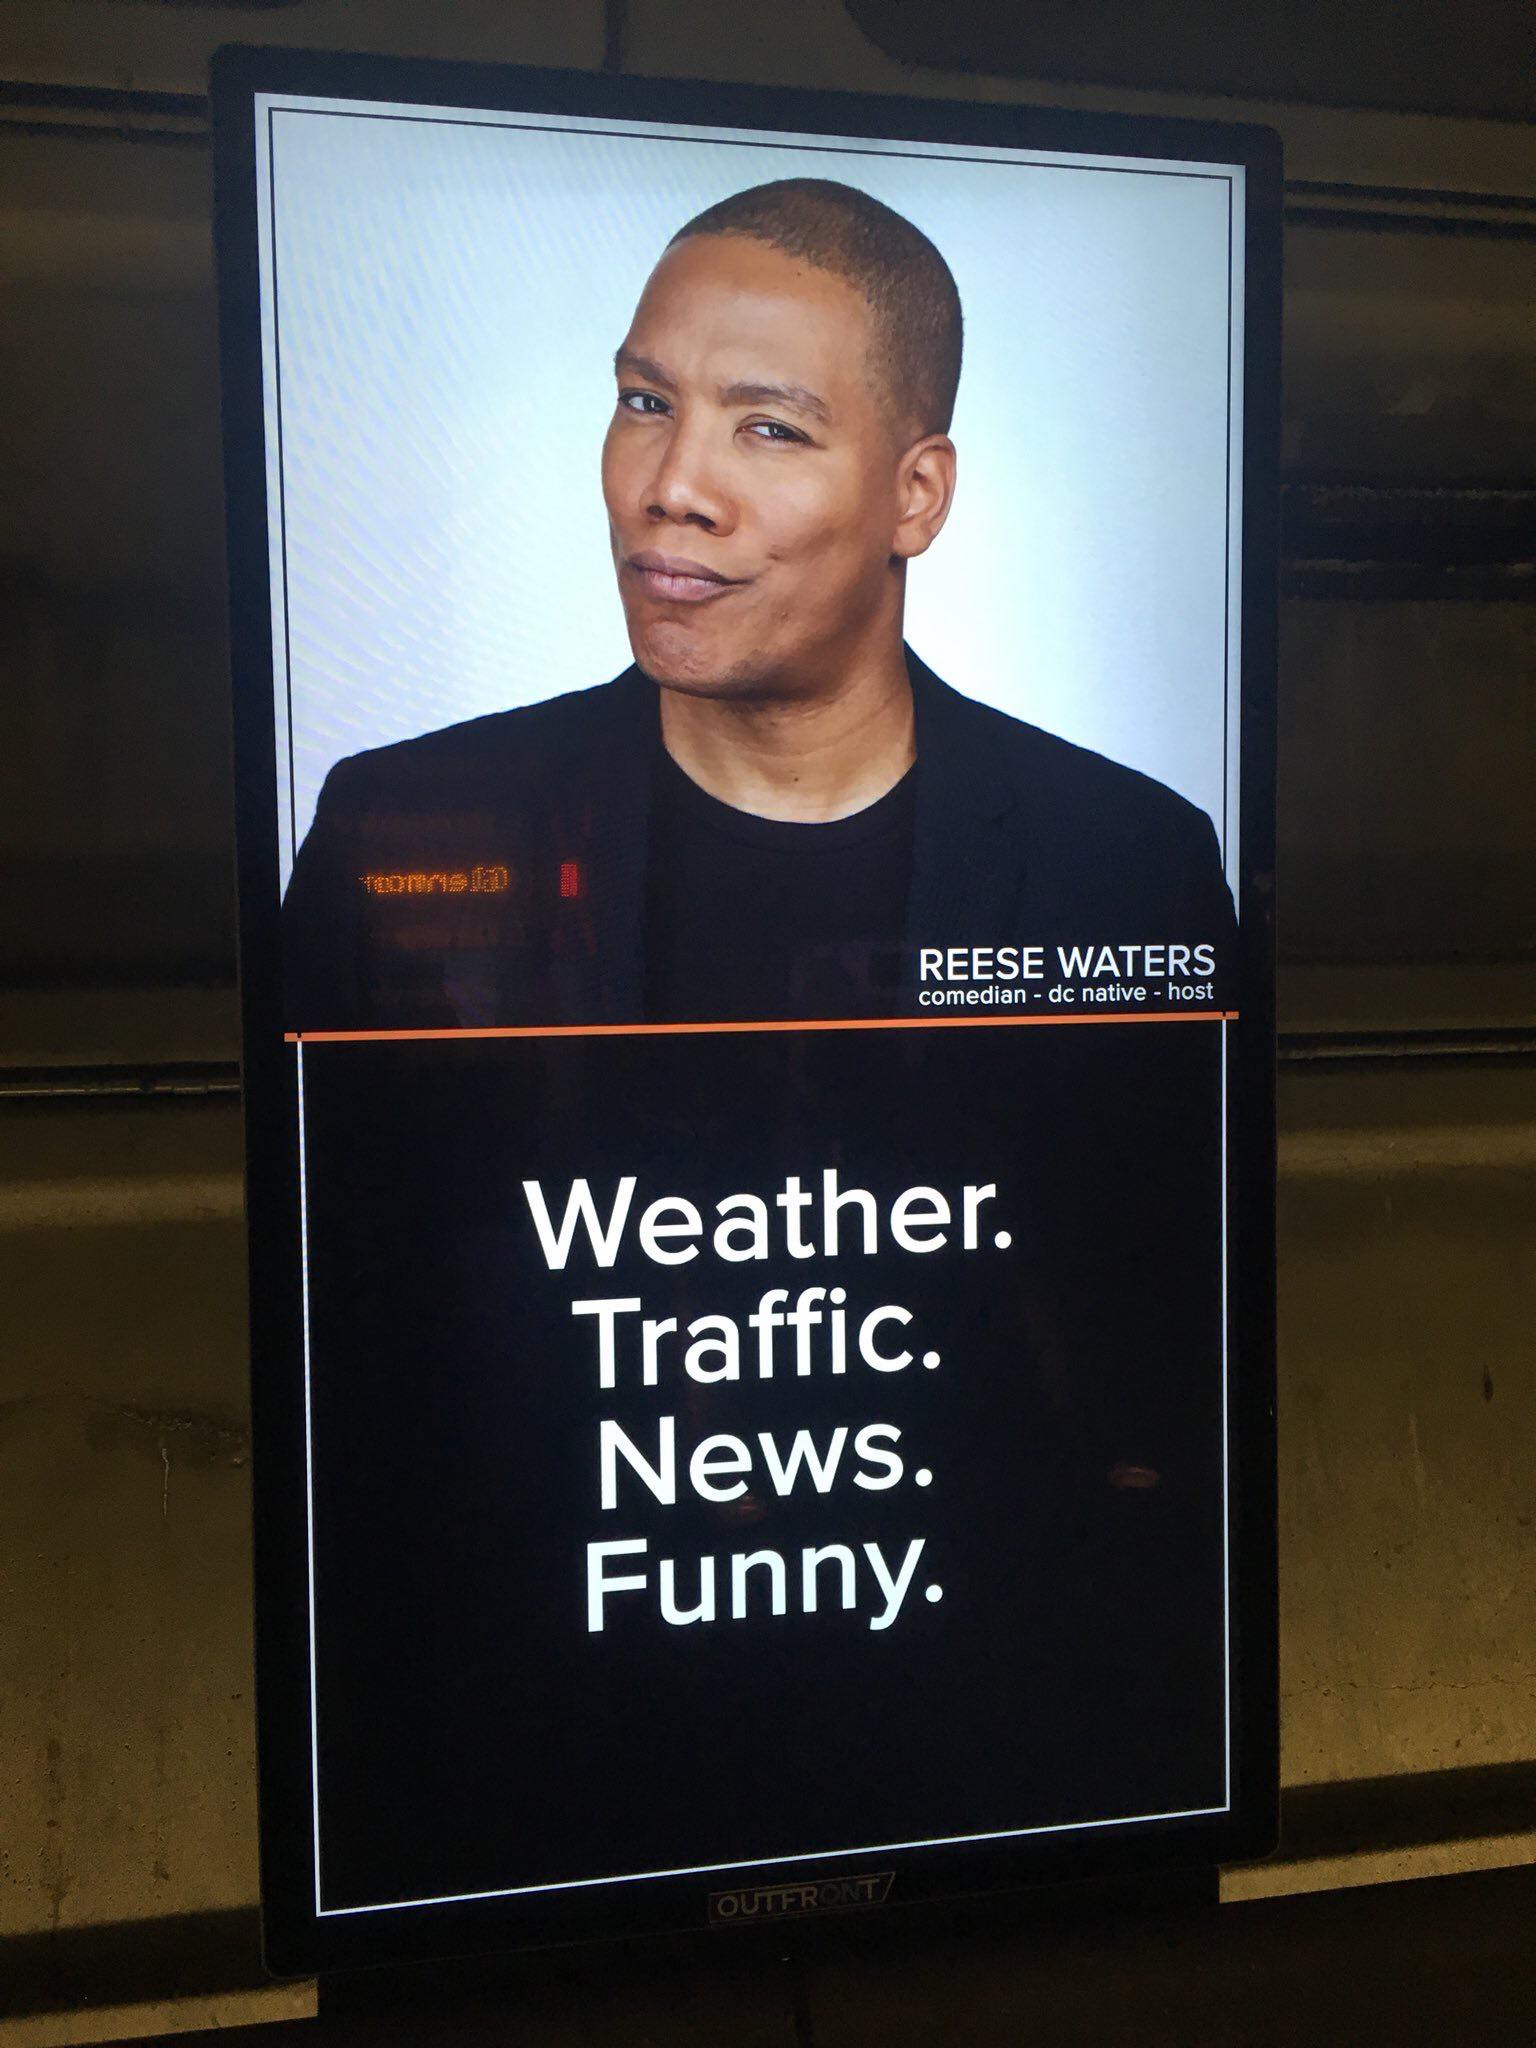 A promo for "Get Up DC," a new morning show—featuring comedian Reese Waters—at TEGNA-owned WUSA in D.C. Of the “big five” broadcasting companies, TEGNA stands out from its competitors in terms of innovation efforts